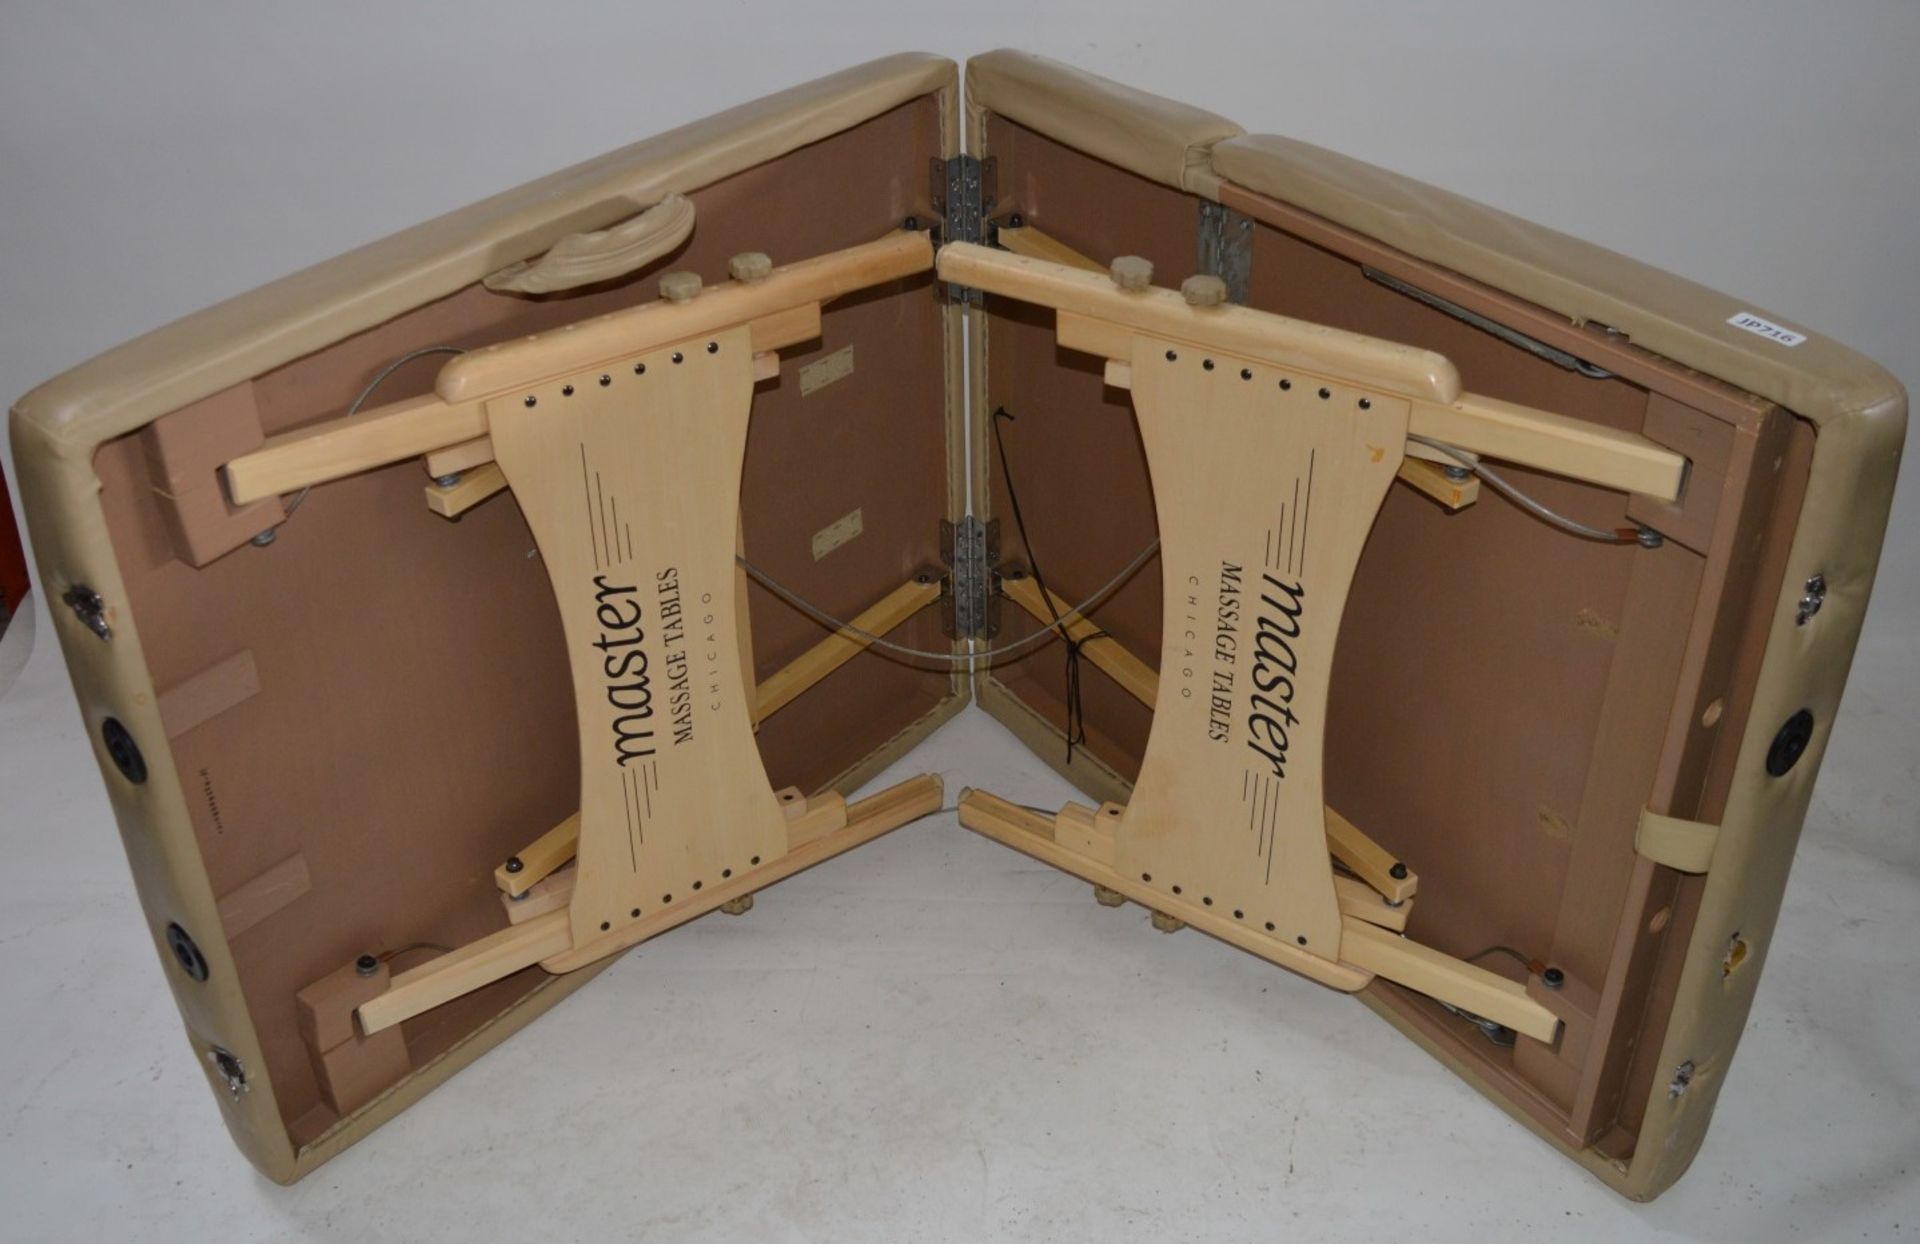 1 x Master Chicago Massage Table - Fold Up Massage Table Suitable For Home or Business Use - Very - Image 2 of 5